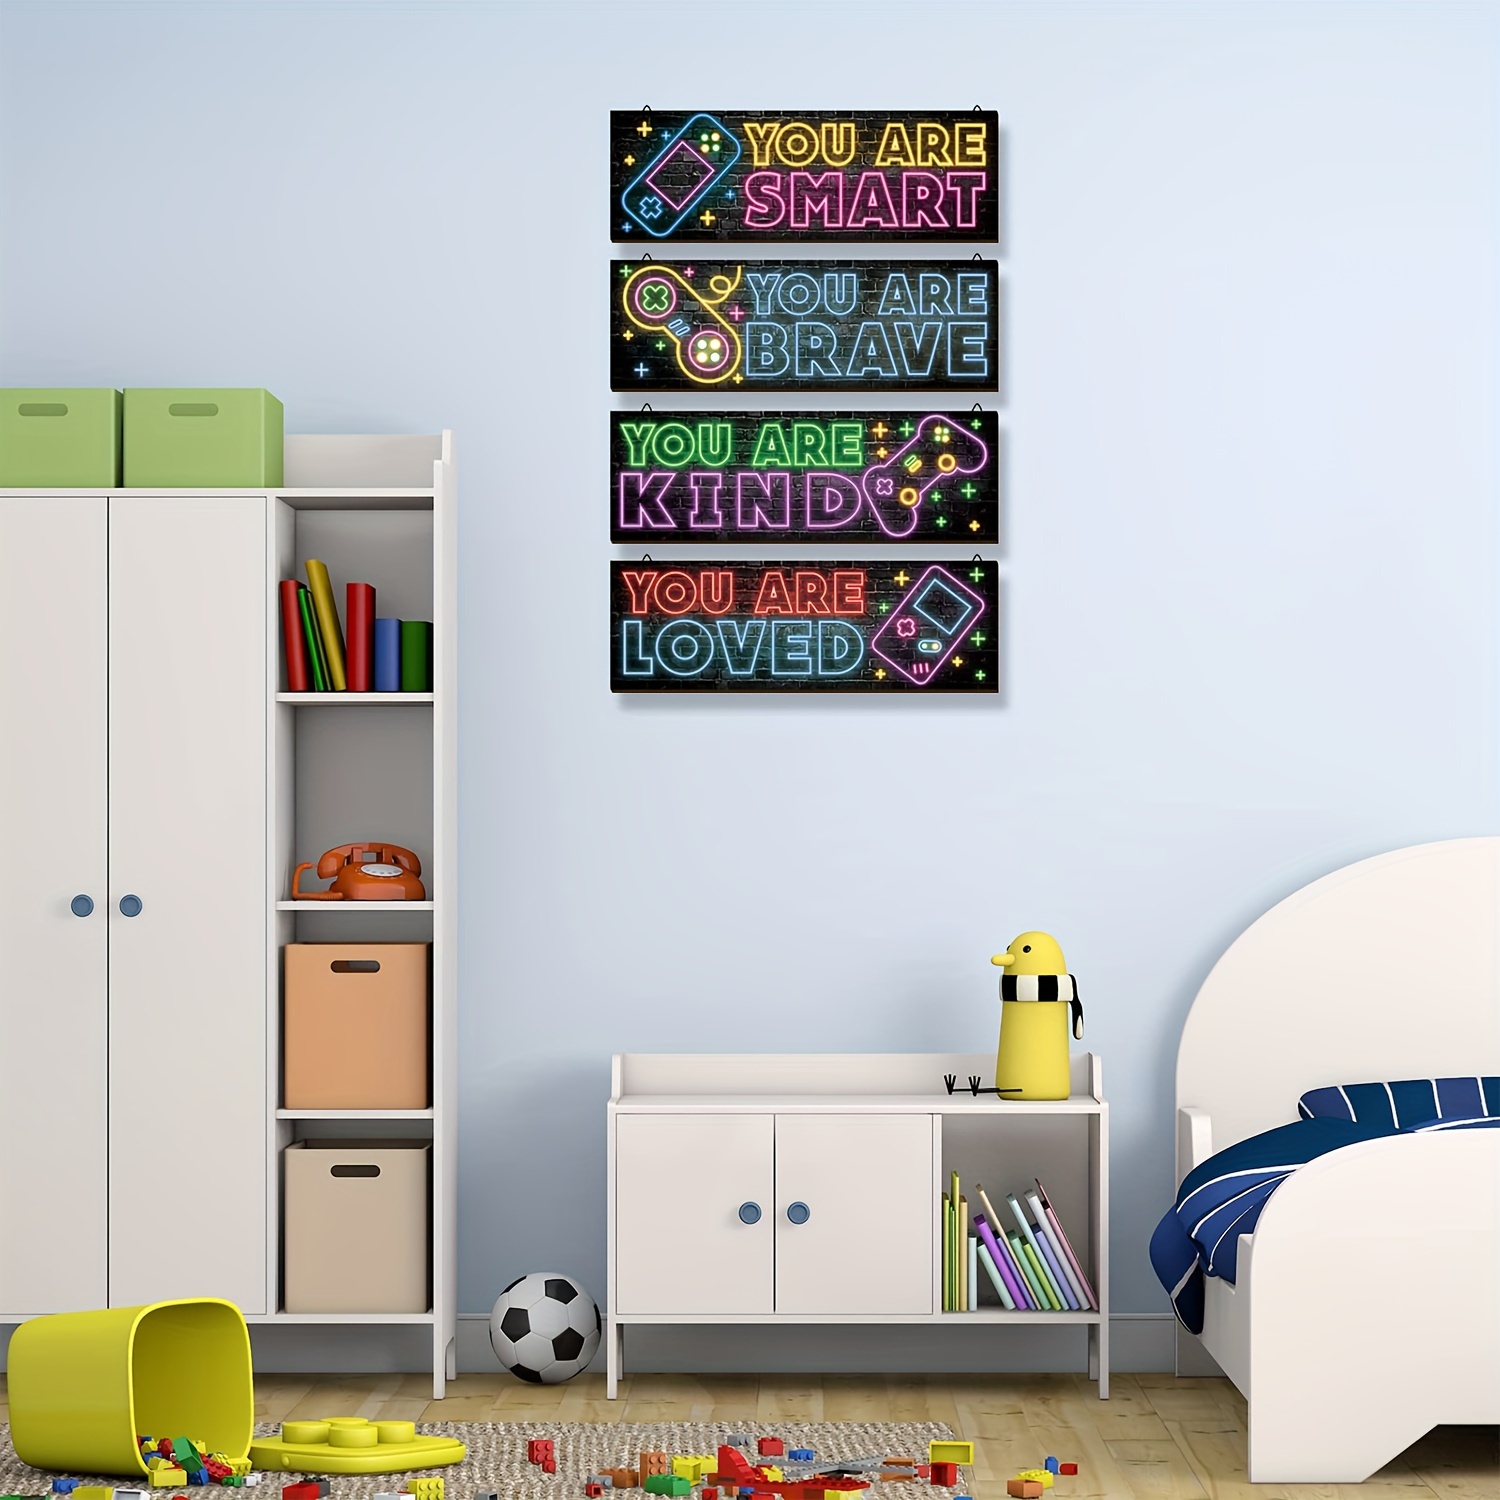 Neon Gaming Posters for Boys Room Decor,Gaming Room Decor,Boys Bedroom  Decor,Gamer Decor,Inspirational Posters for Video Game Room,Game Room